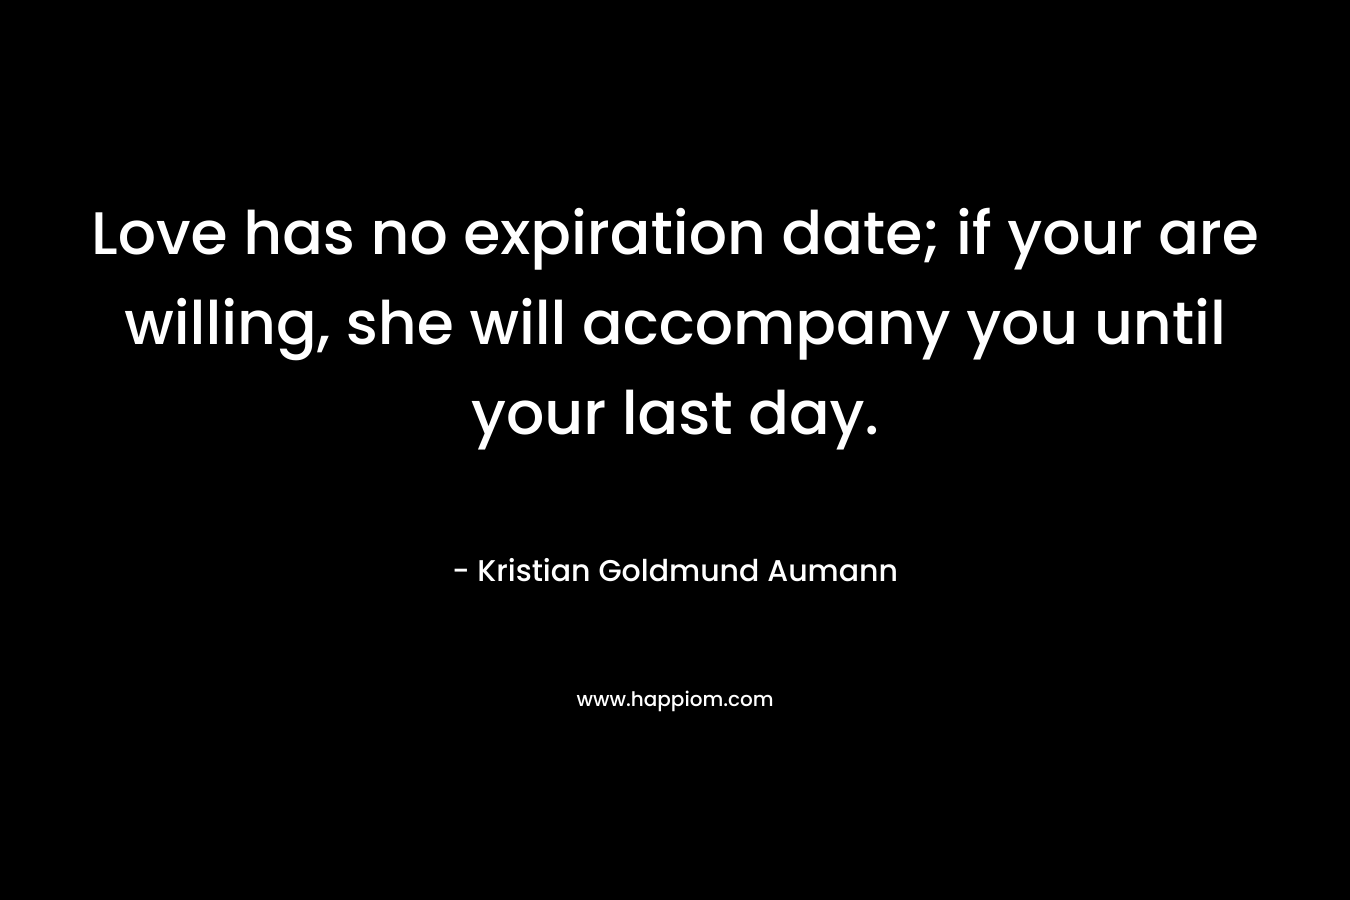 Love has no expiration date; if your are willing, she will accompany you until your last day.